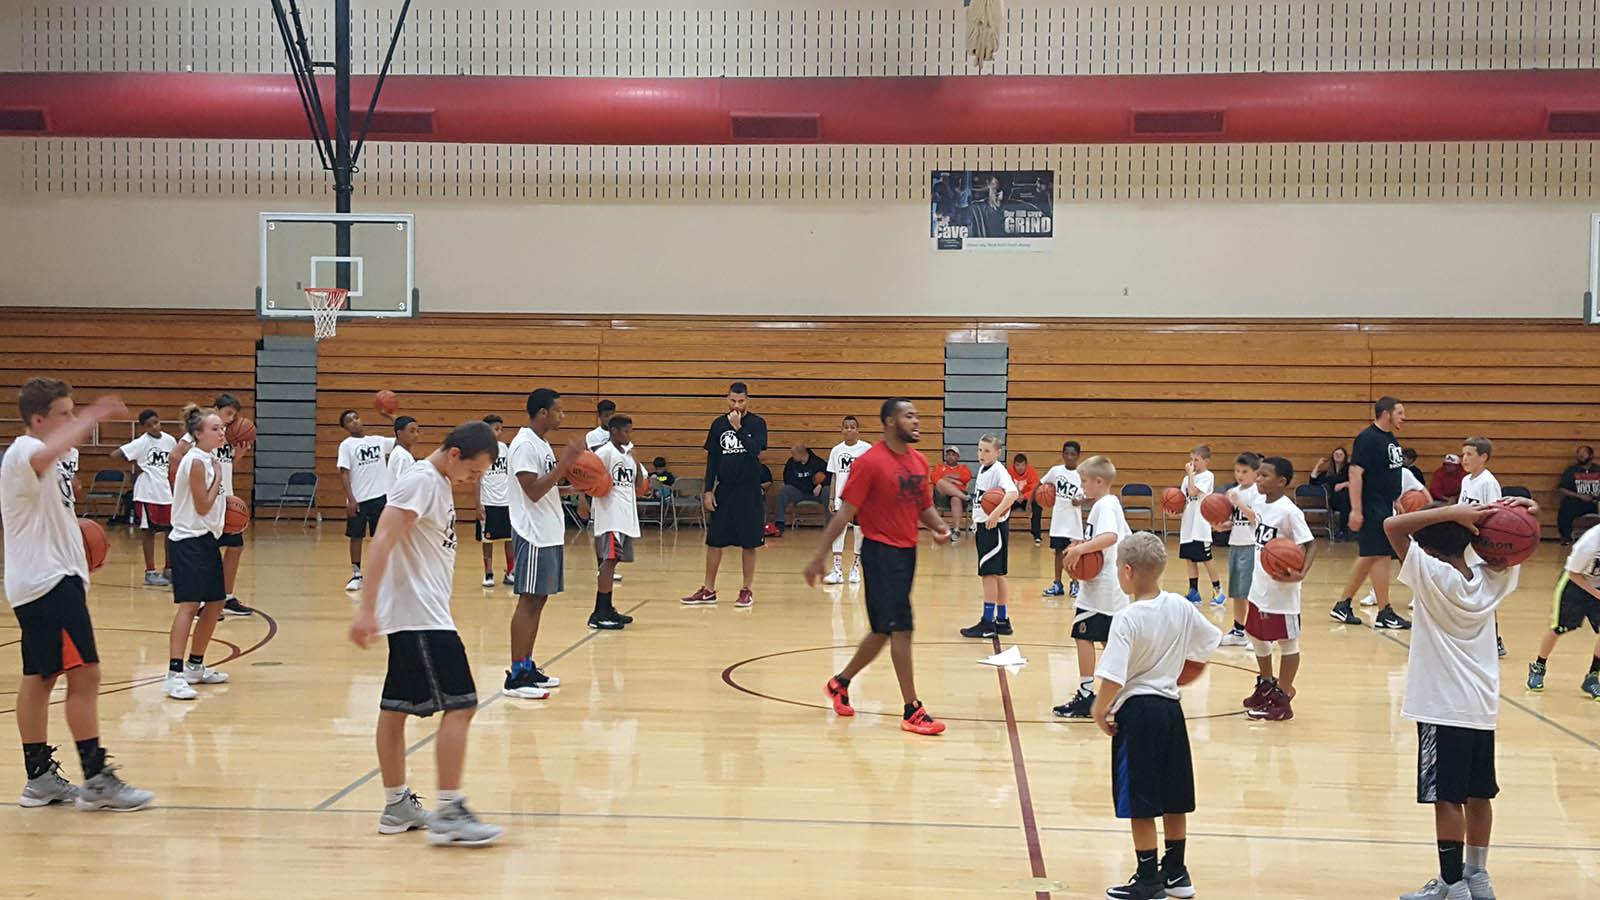 All of our trainers are experts with extensive experience in playing and teaching basketball. There are absolutely no exceptions.